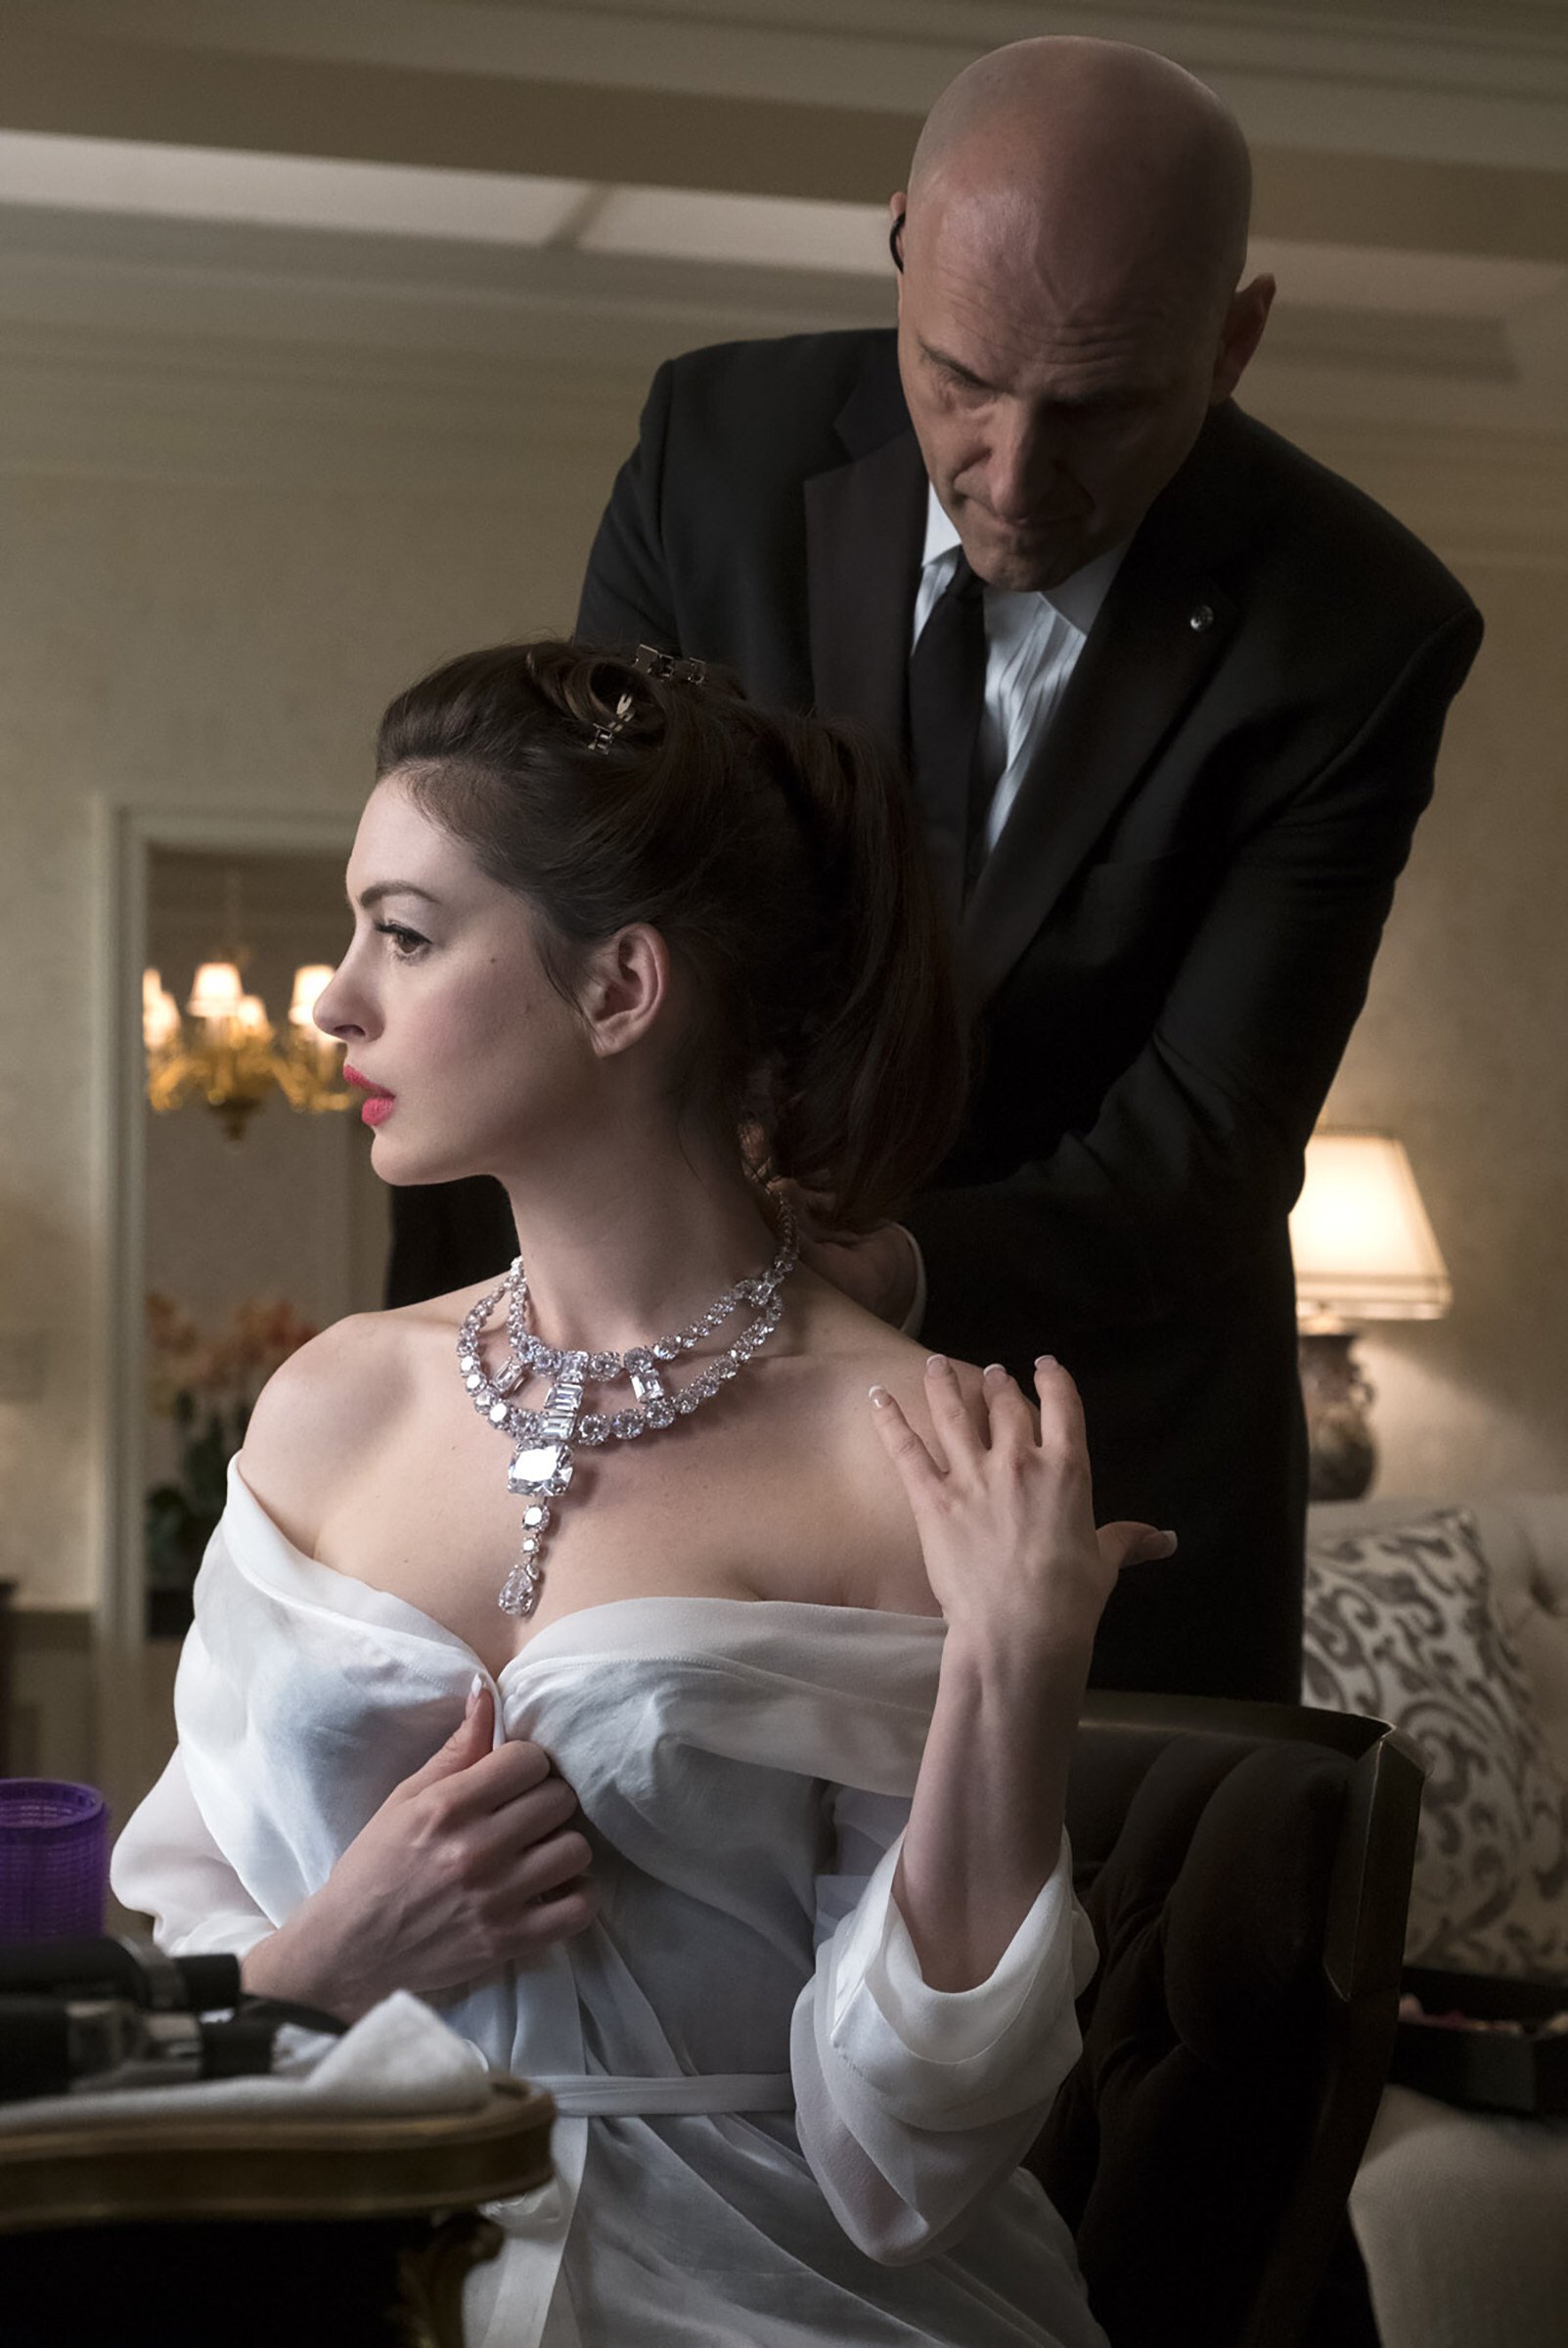 Daphne Kluger played by Anne Hathaway plots to steal Cartier’s legendary Toussaint necklace in Ocean’s 8. Photo: handout